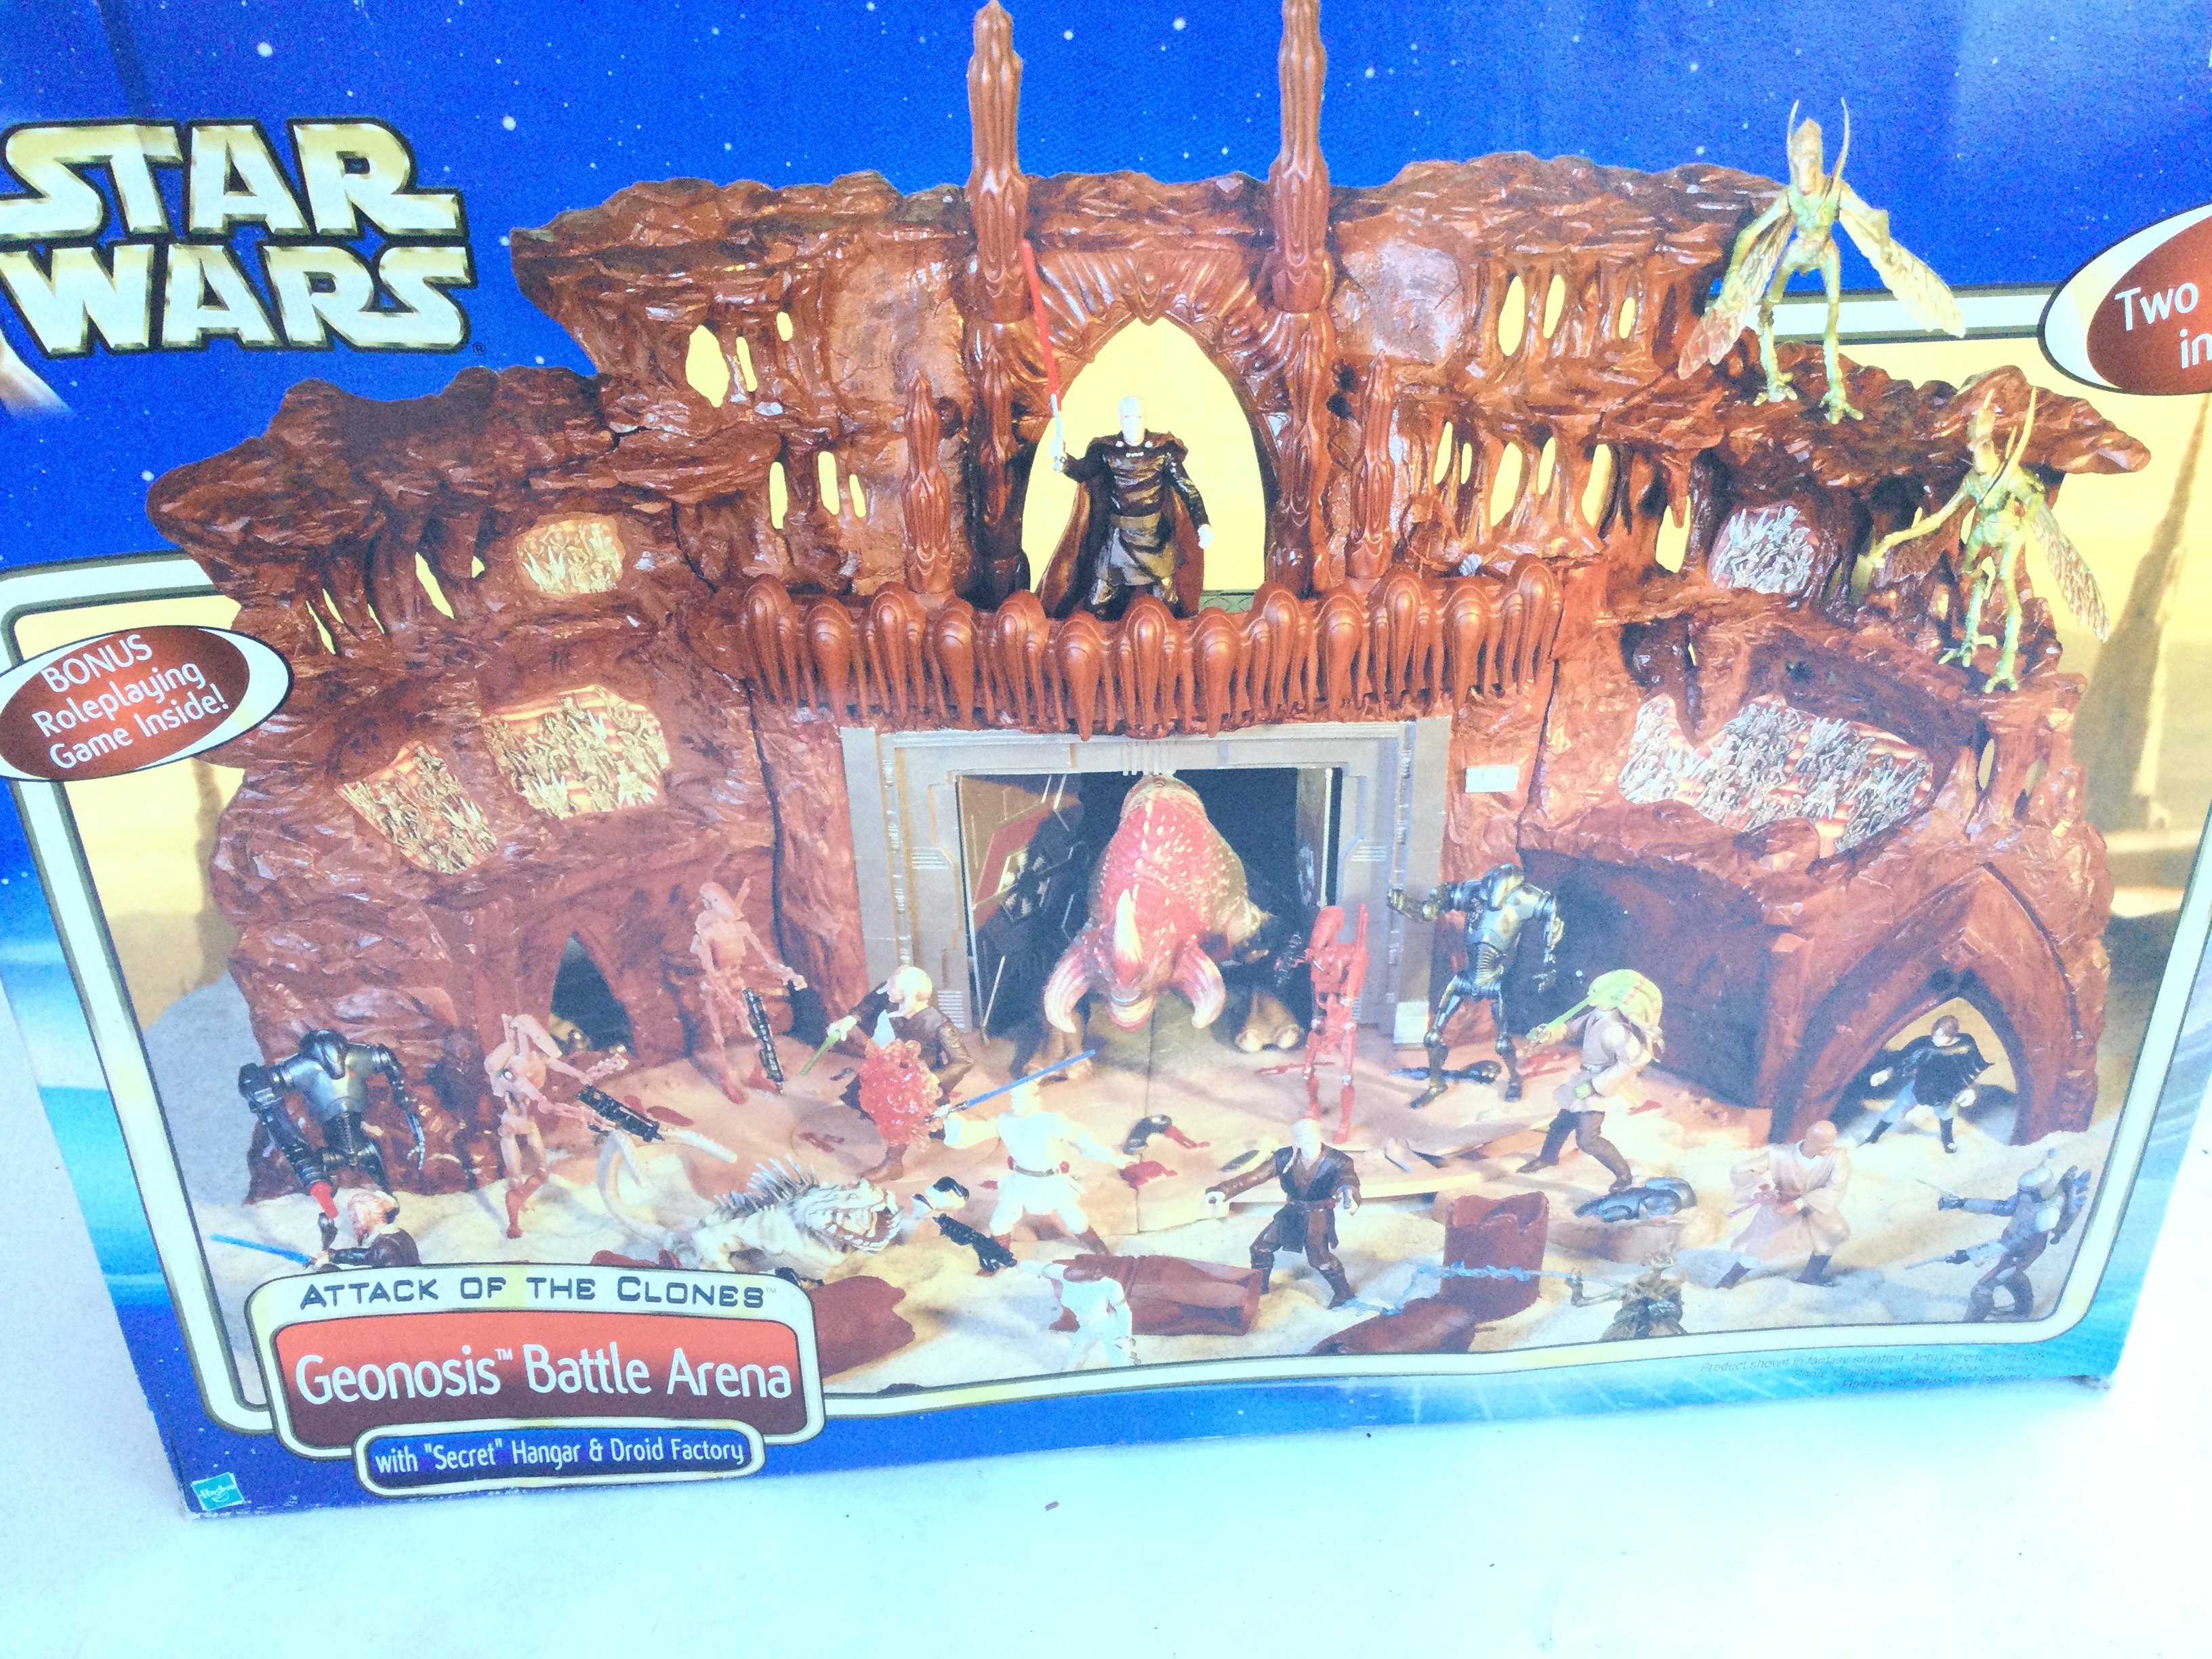 A Box Containing StarWars Soft Toys. A Chess set. A 3D Puzzle. And a Boxed Geonosis Battle Arena. - Image 3 of 3